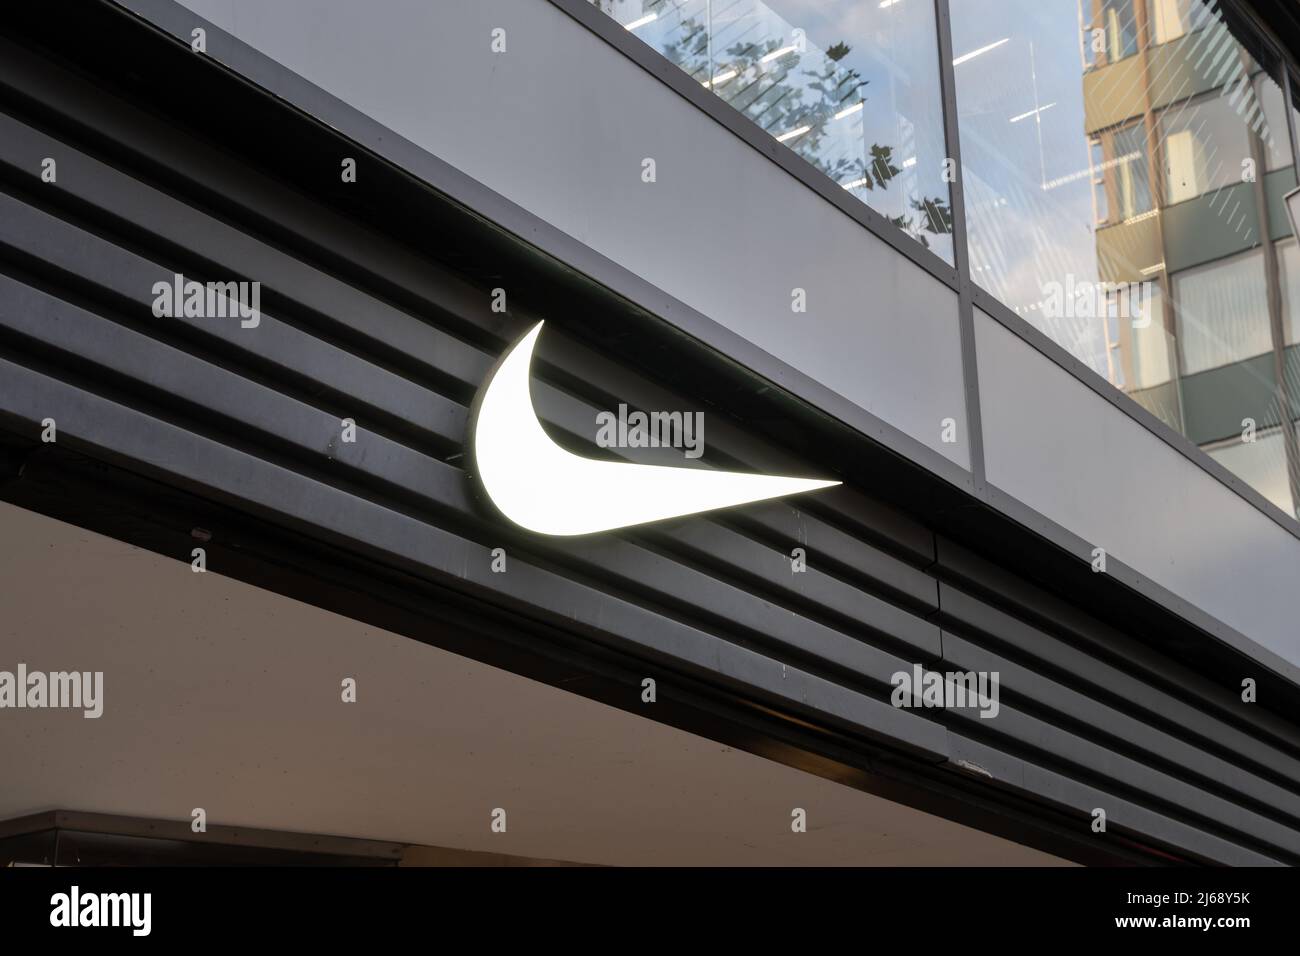 Nike Swoosh logo on a facade of a store in the capital of Germany. Illuminated company brand sign as advertising on a building. Modern architecture Stock Photo